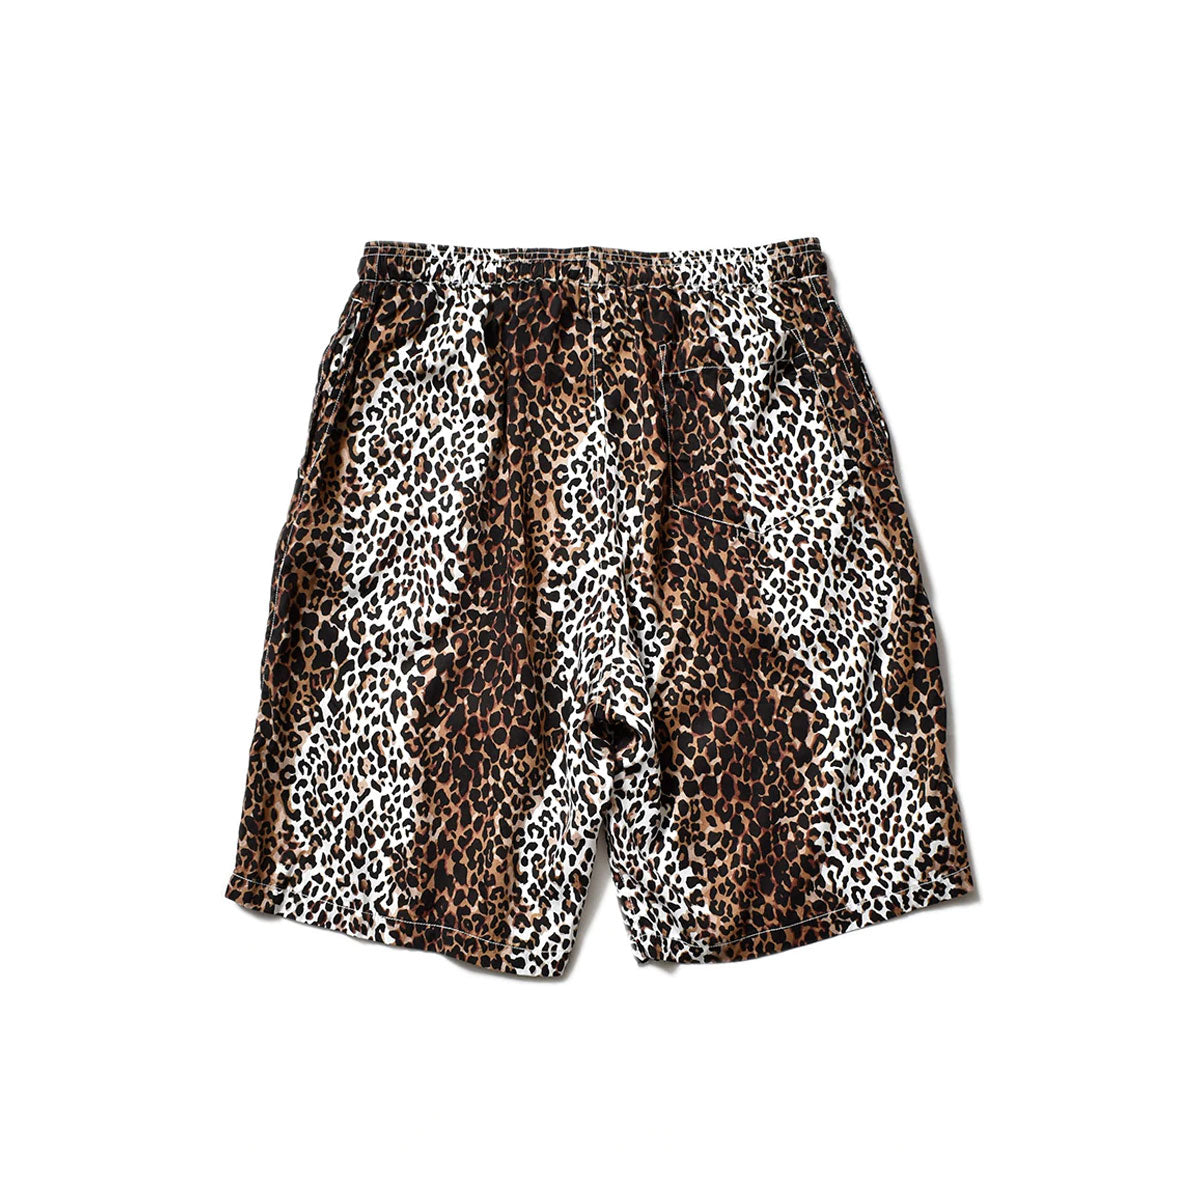 CD Leopard Denim Surf Shorts - Why are you here?